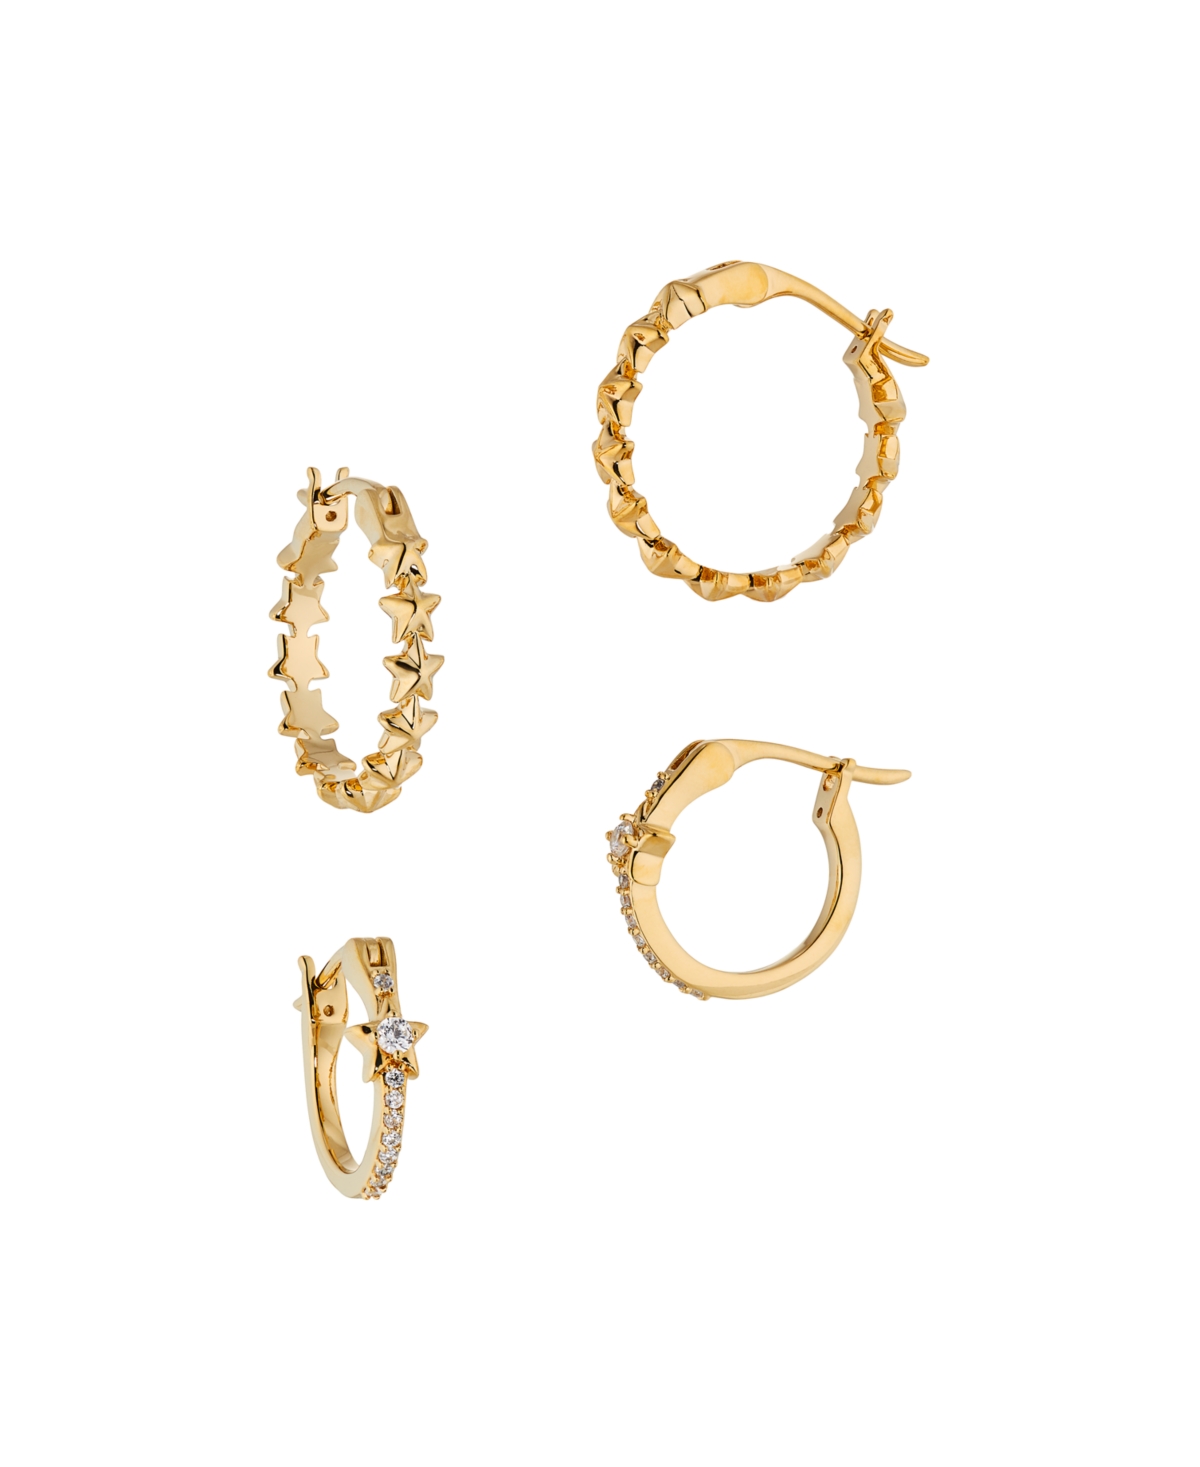 Ava Nadri Small Hoop Earrings In 18k Gold Plated Brass Set 4 Pieces